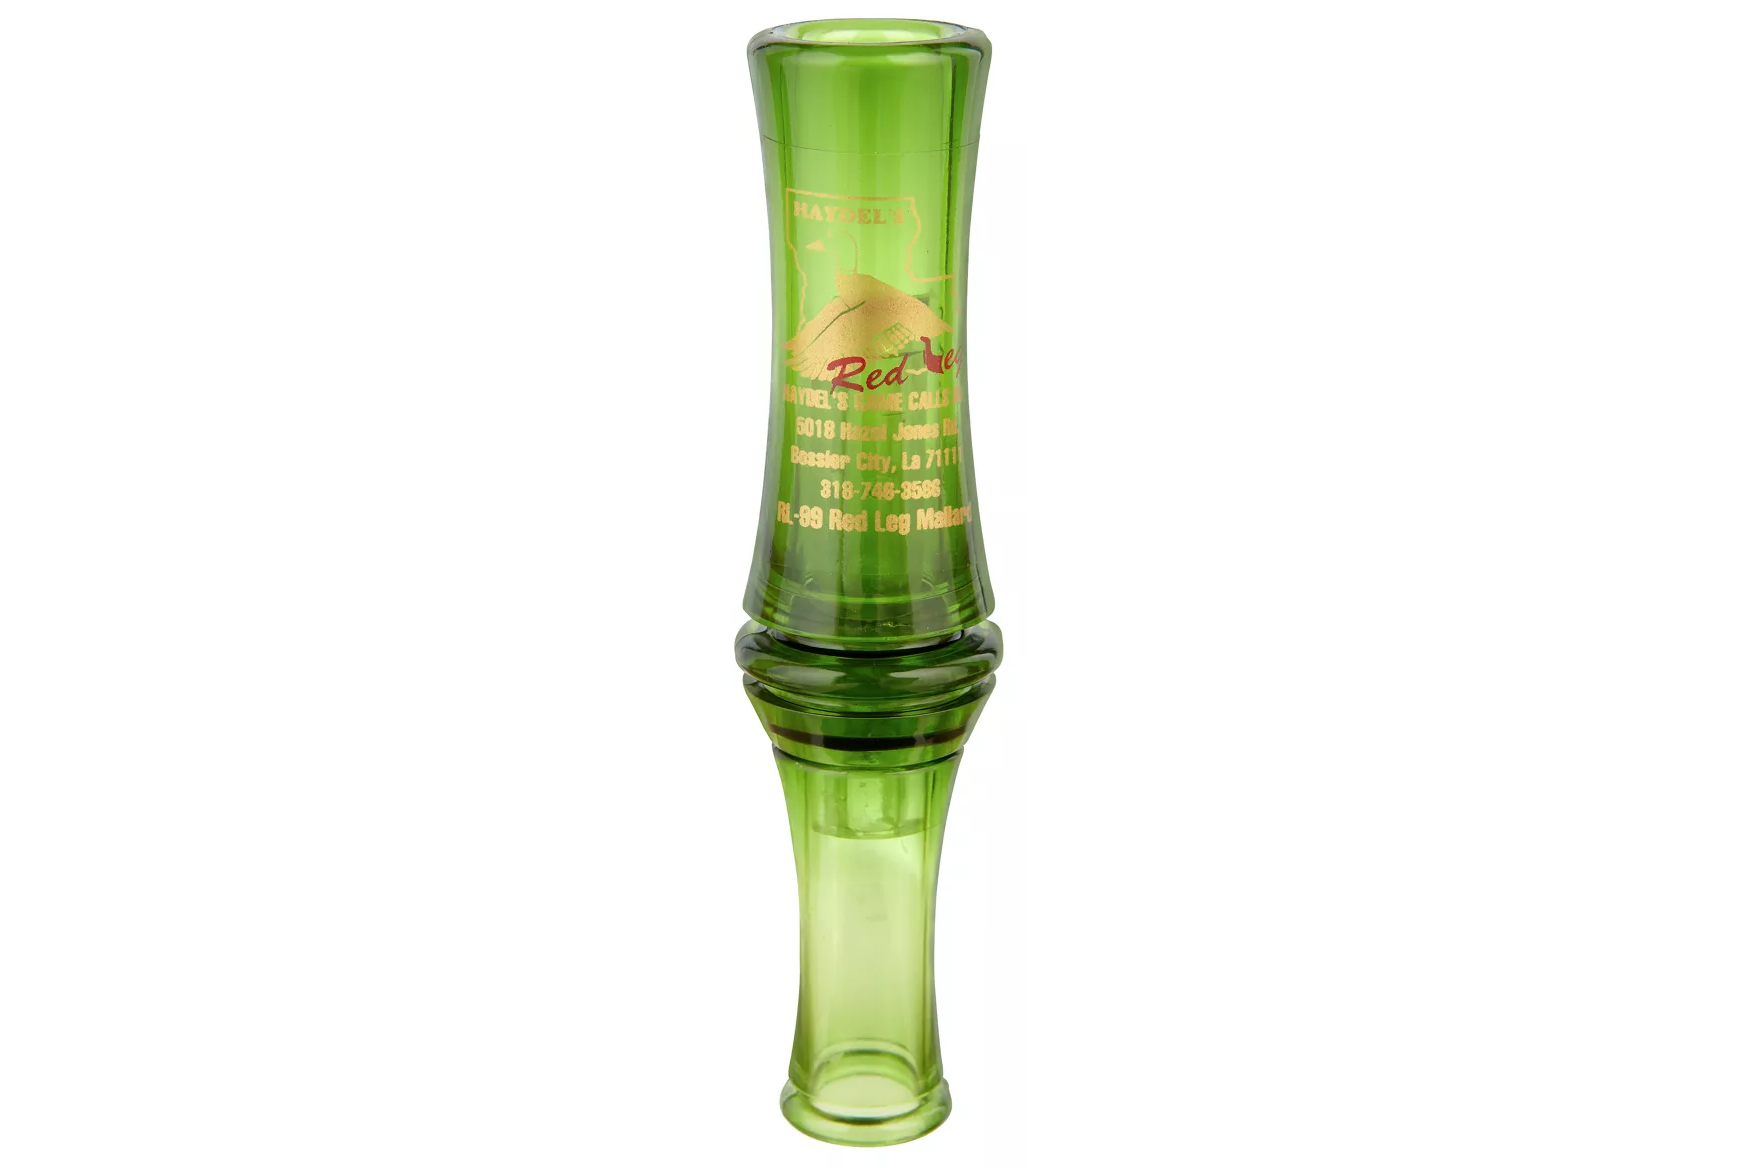 Haydels Duck Double Reed Mallard Call Hunting Equipment Plastic Clear DR-85 